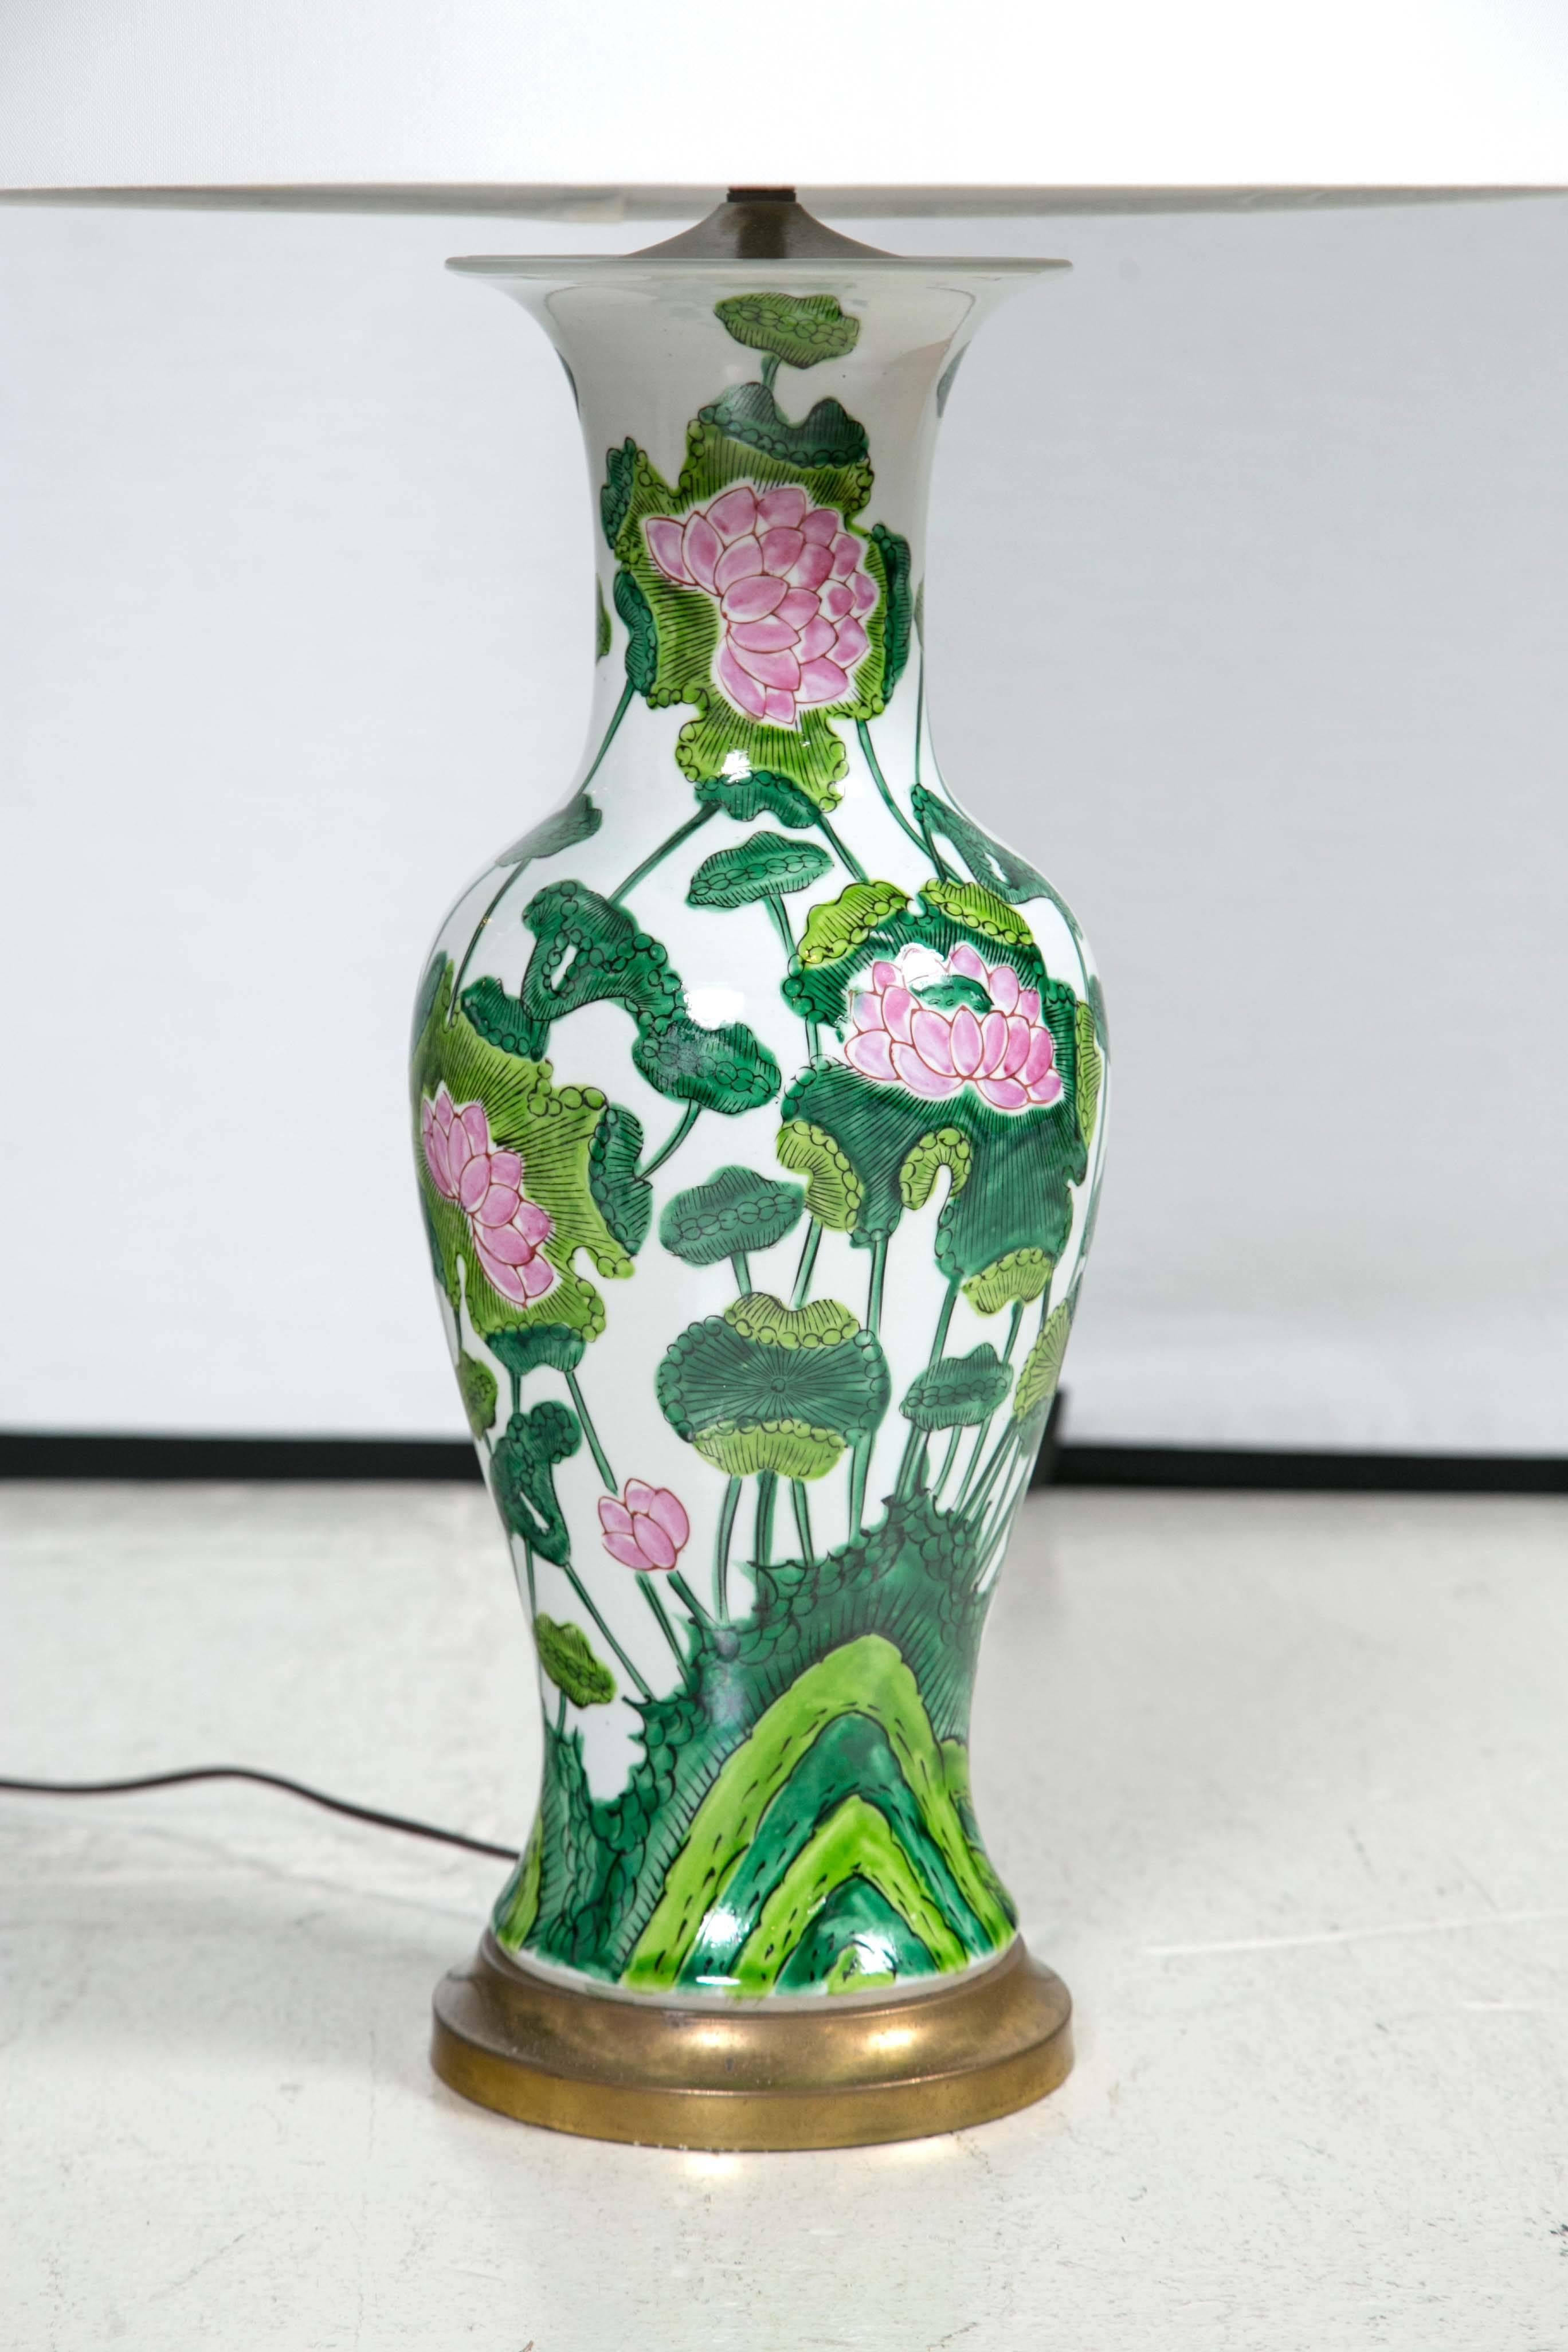 Tall ceramic lamps in white glaze, with pink and green water lilies. Shades are included.